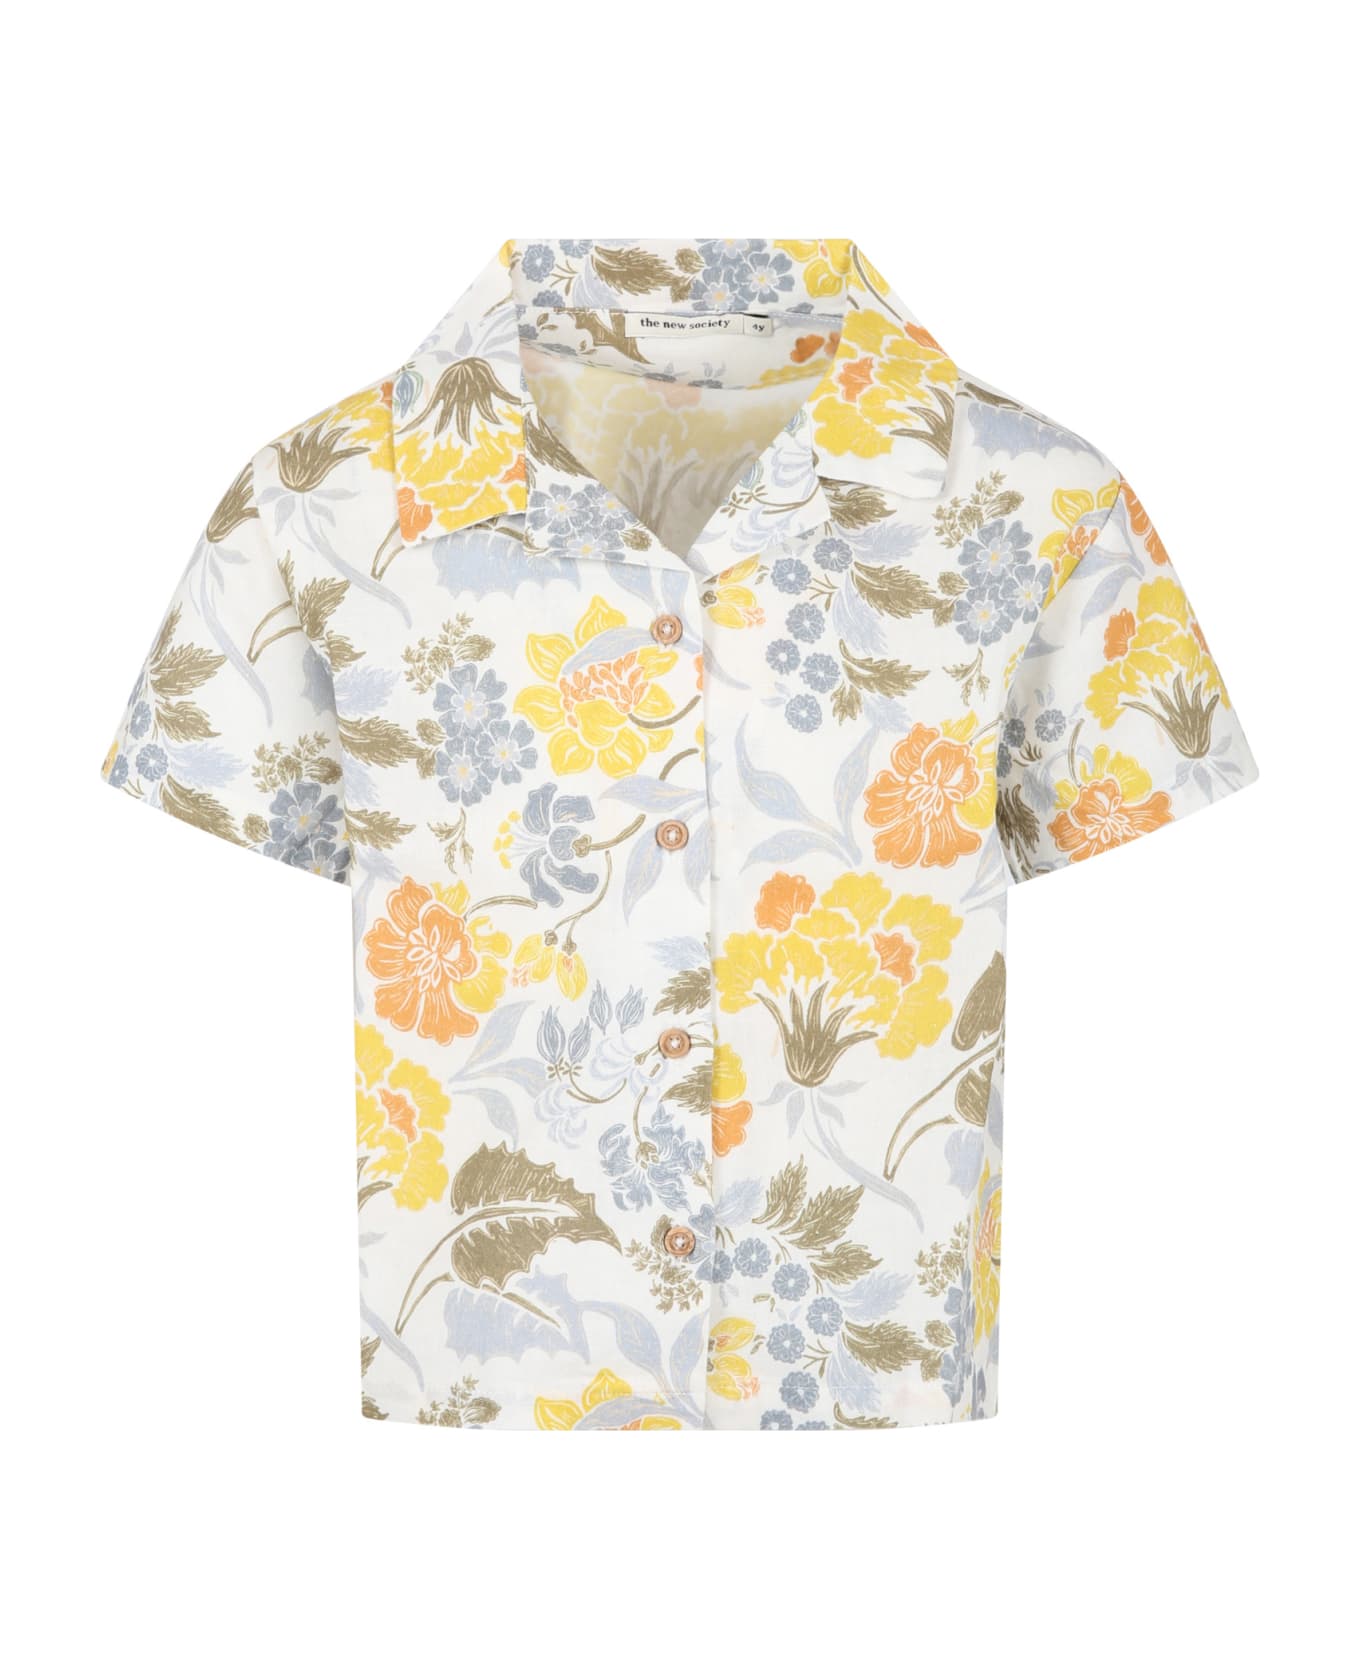 The New Society White Shirt For Boy With All-over Flowers - Multicolor